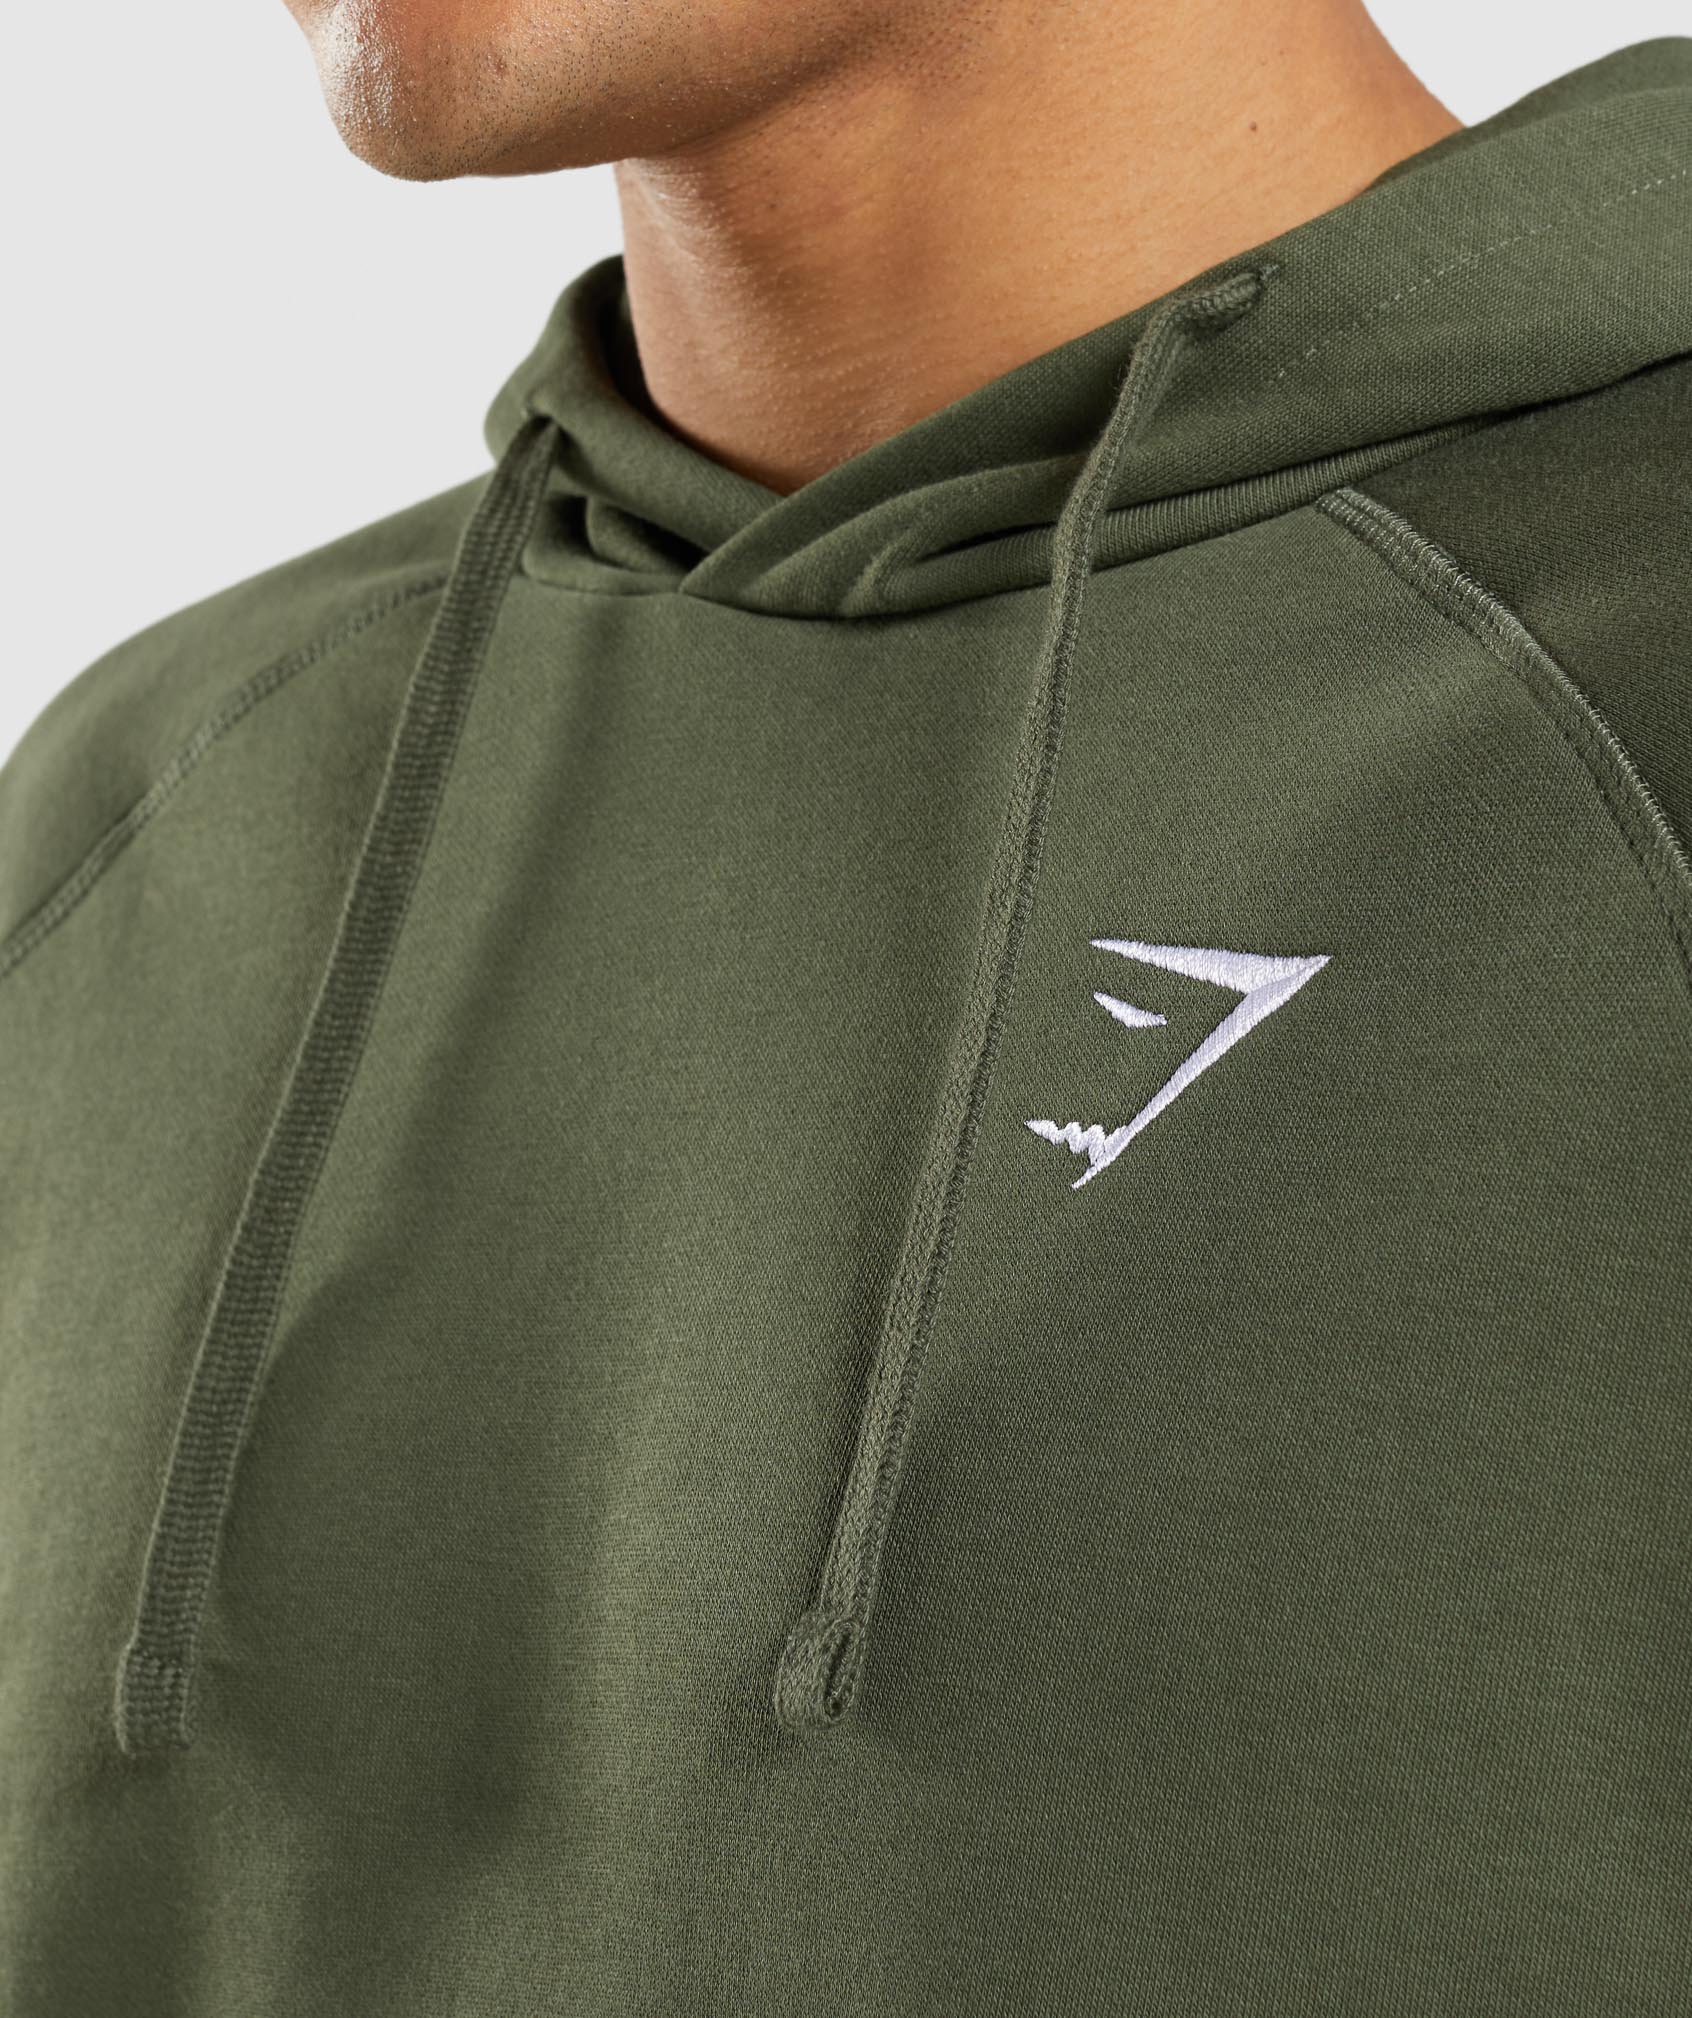 The Gymshark Women's Crest Hoodie is the perfect cover up as the weather  turns cooler.